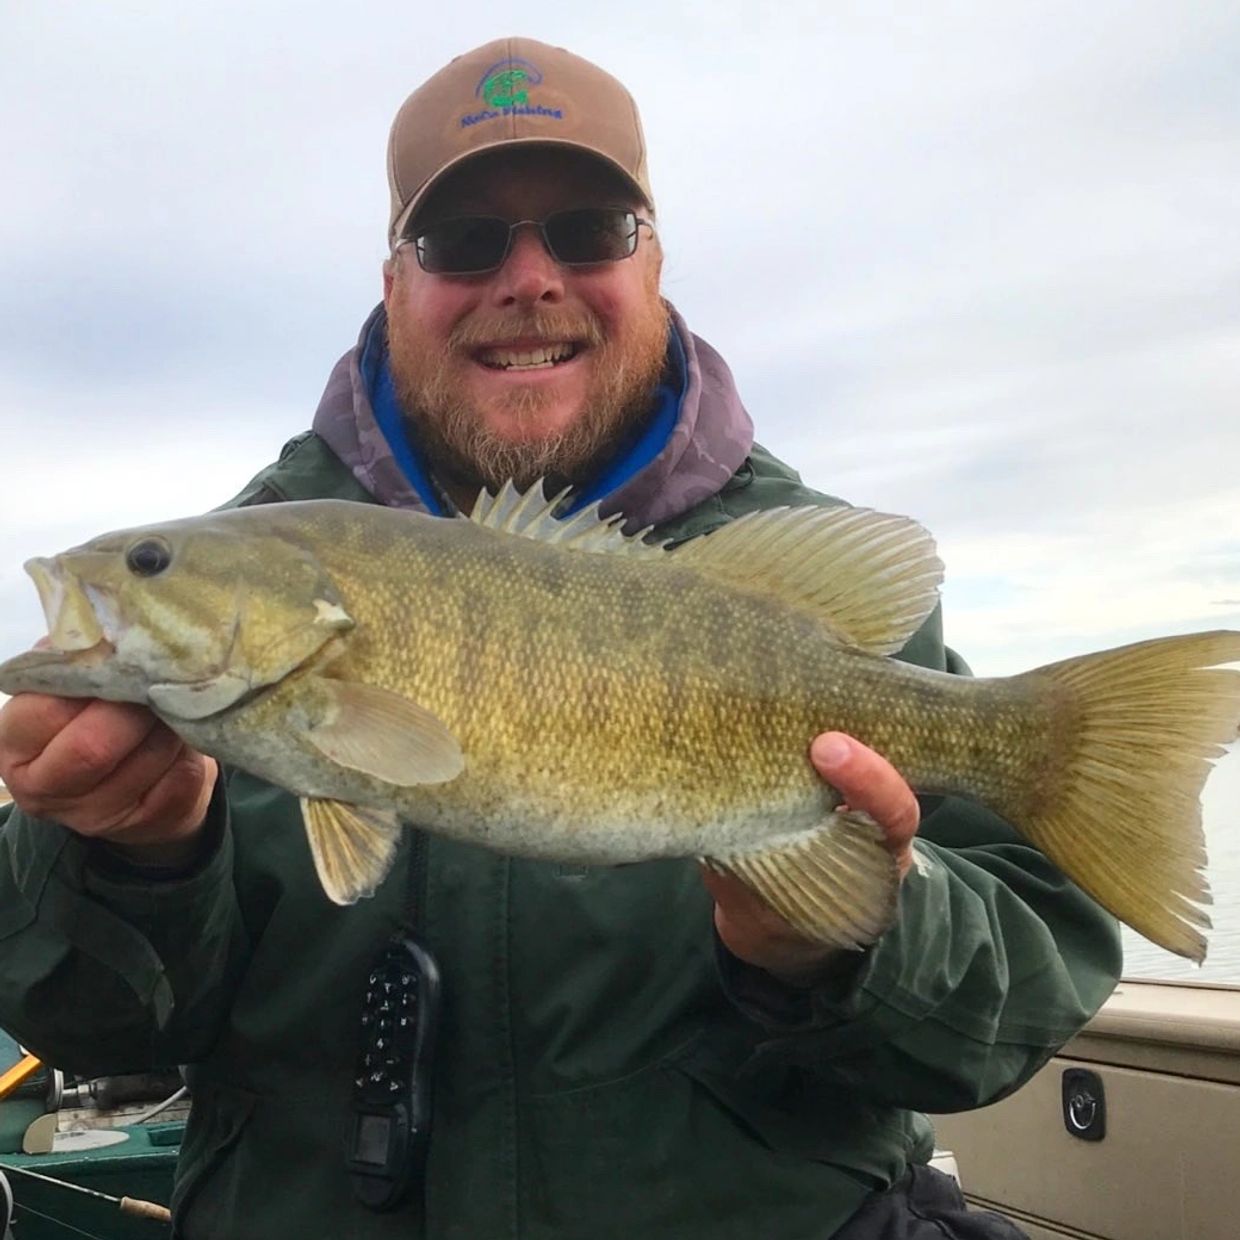 Northern Colorado Fishing Outfitters 
Colorado Fishing Guide
Fishing Charter
Fishing guide service 